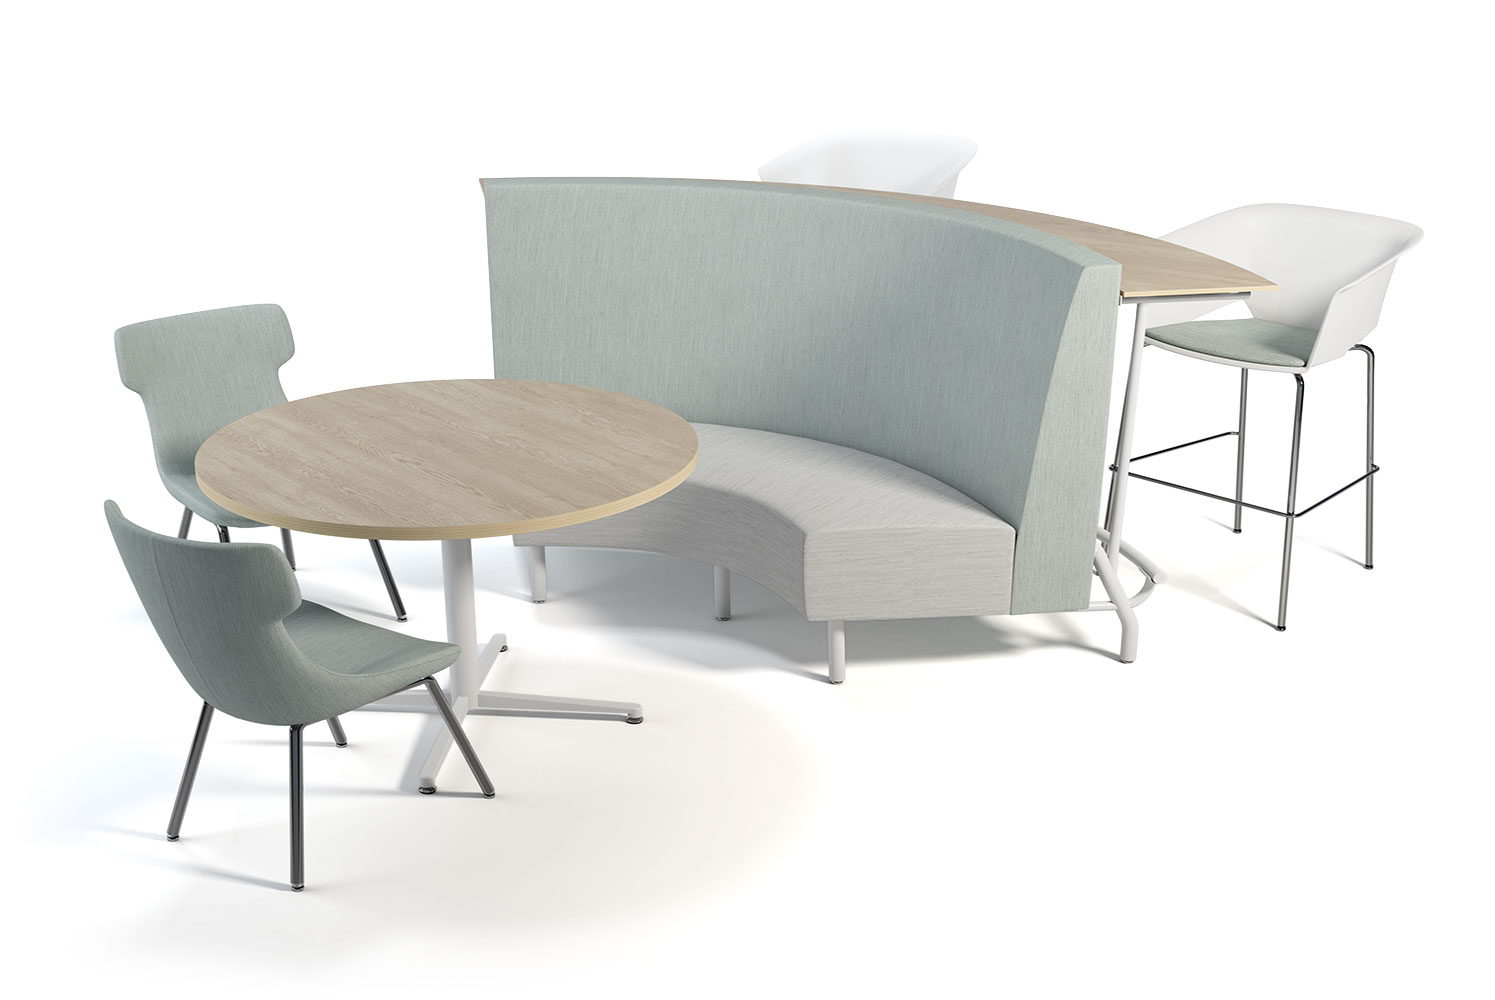 Tivoli 90 Curve with High Back, Bar Height Shelf and Footrest Shown With Nathan, Cayman and Lotus